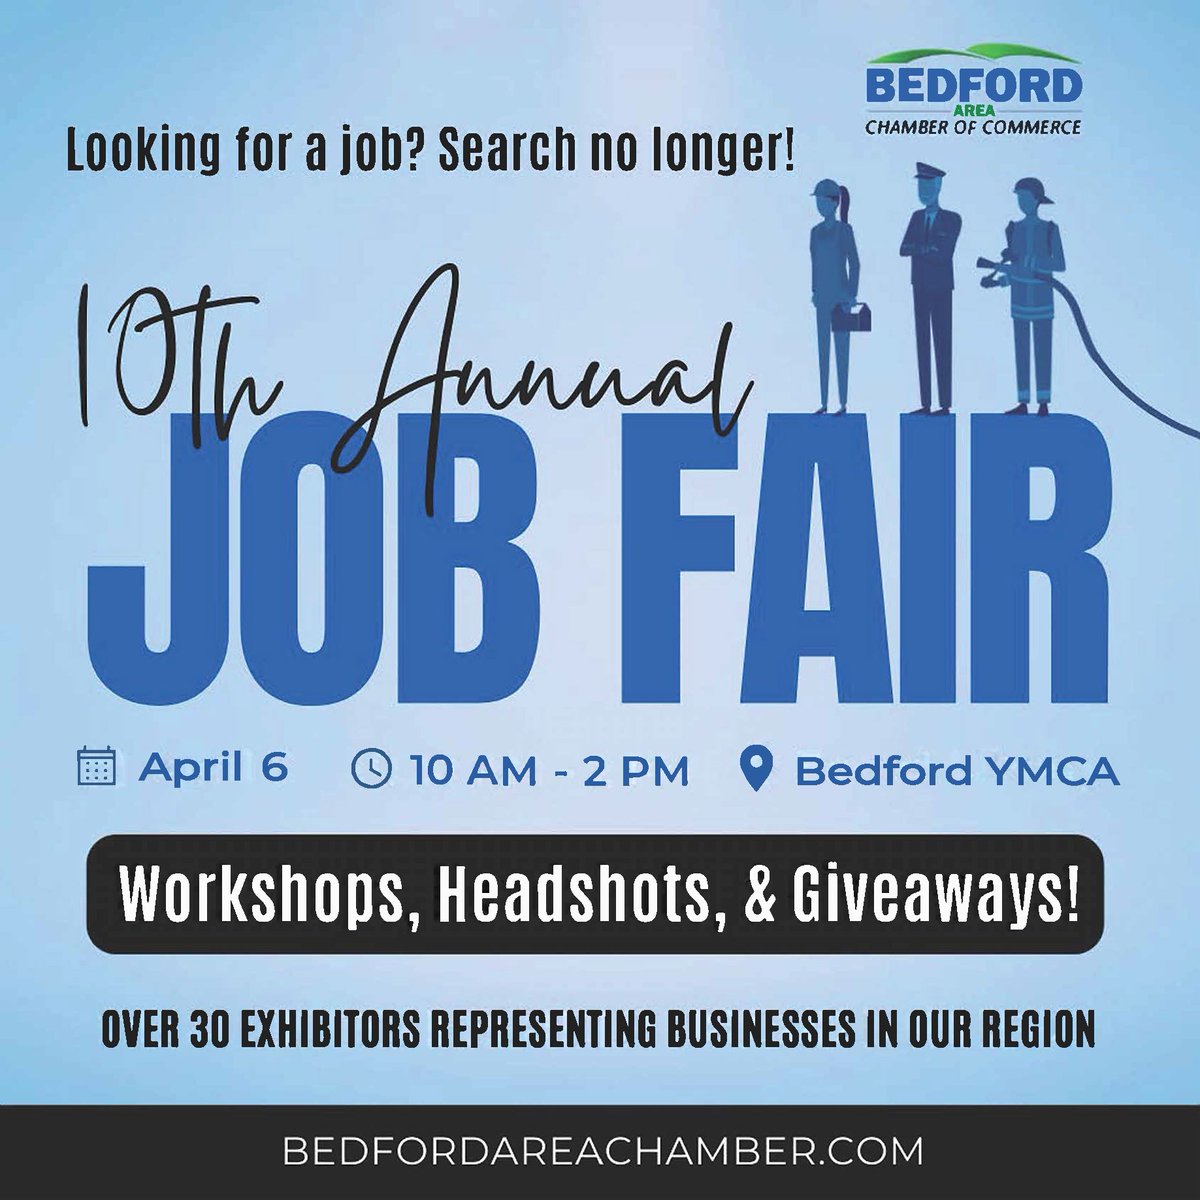 ❗️ NEW LOCATION ALERT ❗️

With rain in the forecast, the @BedfrdAreaChmbr is moving its Job Fair to the Bedford YMCA. The event is happening tomorrow from 10AM - 2PM at 1111 Turnpike Rd in Bedford. Meet with employers who are ready to hire you! Don't miss this great FREE event!